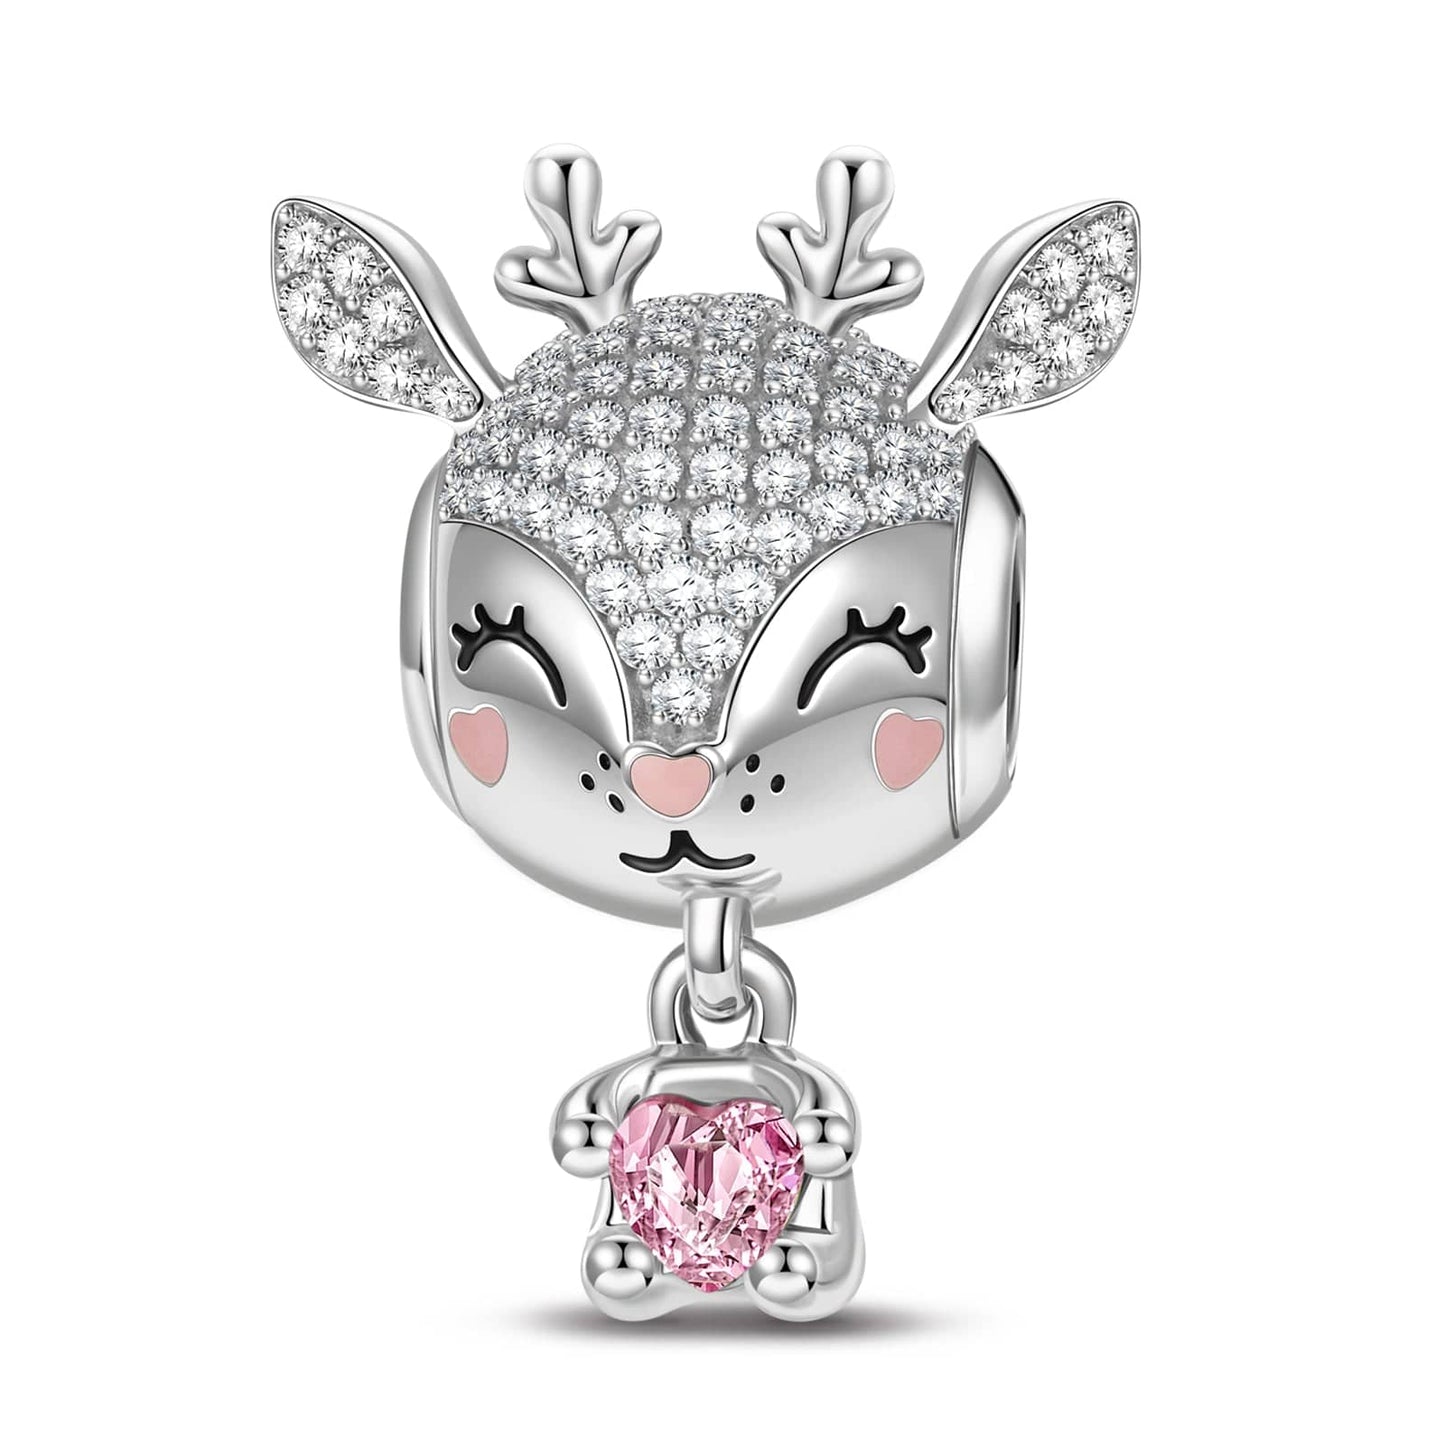 Baby Reindeer Tarnish-resistant Silver Animal Charms With Enamel In Silver Plated - Heartful Hugs Collection